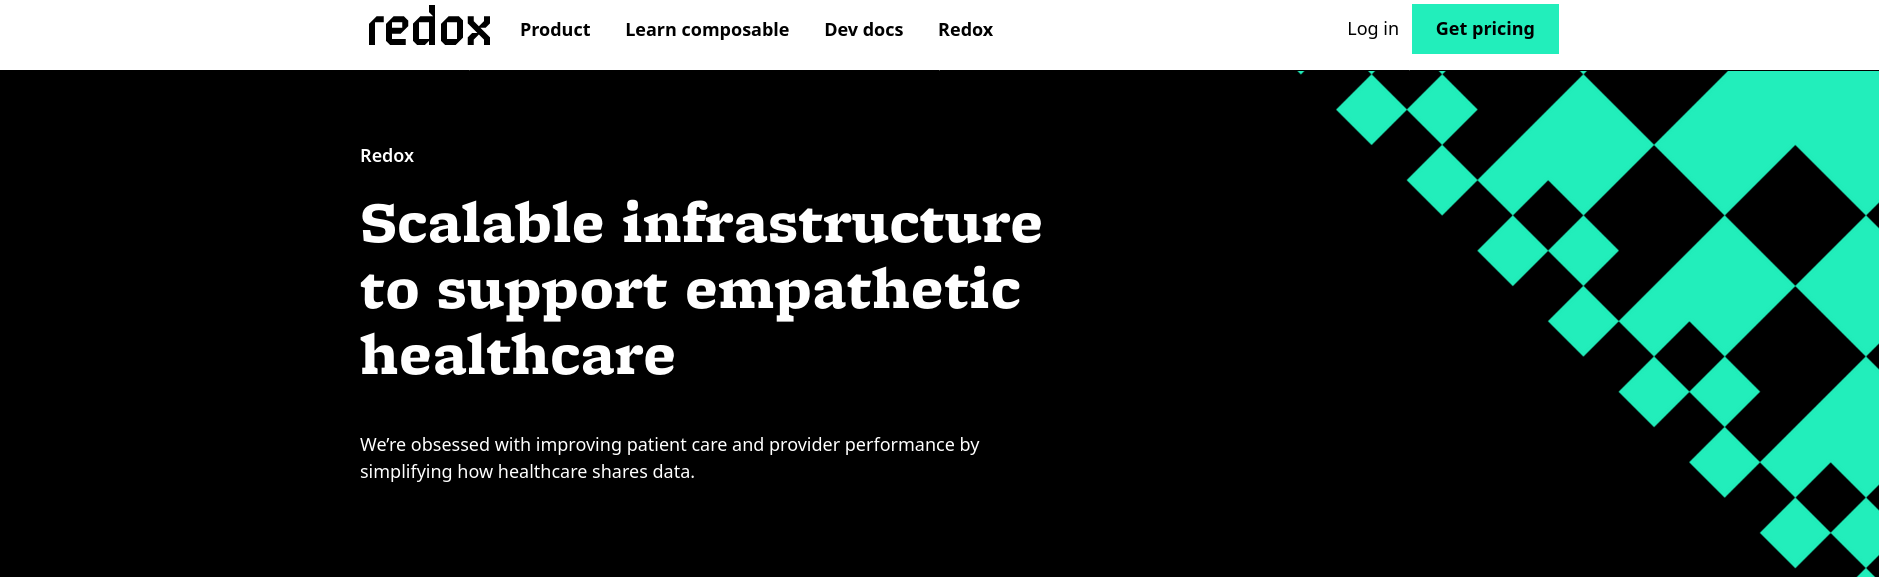 Redox website landing page with text: "Scalable Infrastructure to support empathetic healthcare"